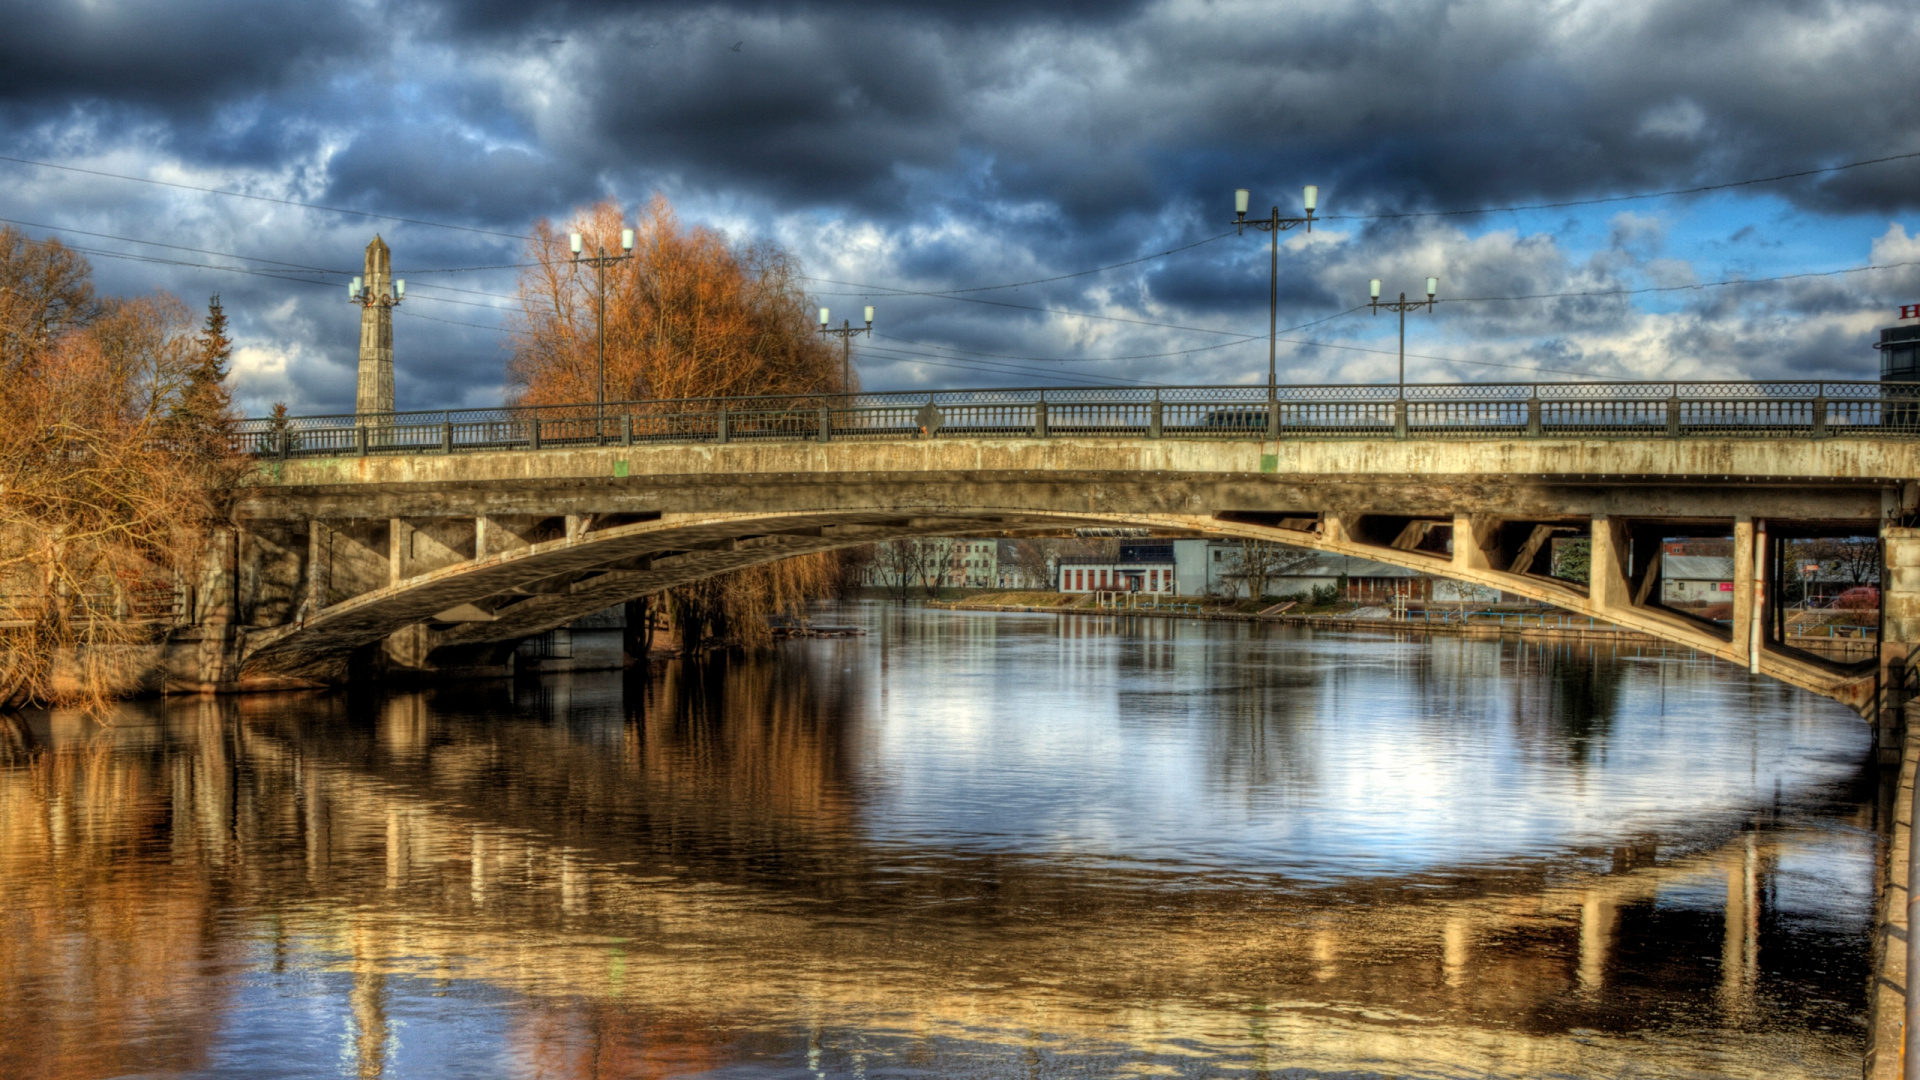 Brown Concrete Bridge Over River Under Cloudy Sky During Daytime. Wallpaper in 1920x1080 Resolution